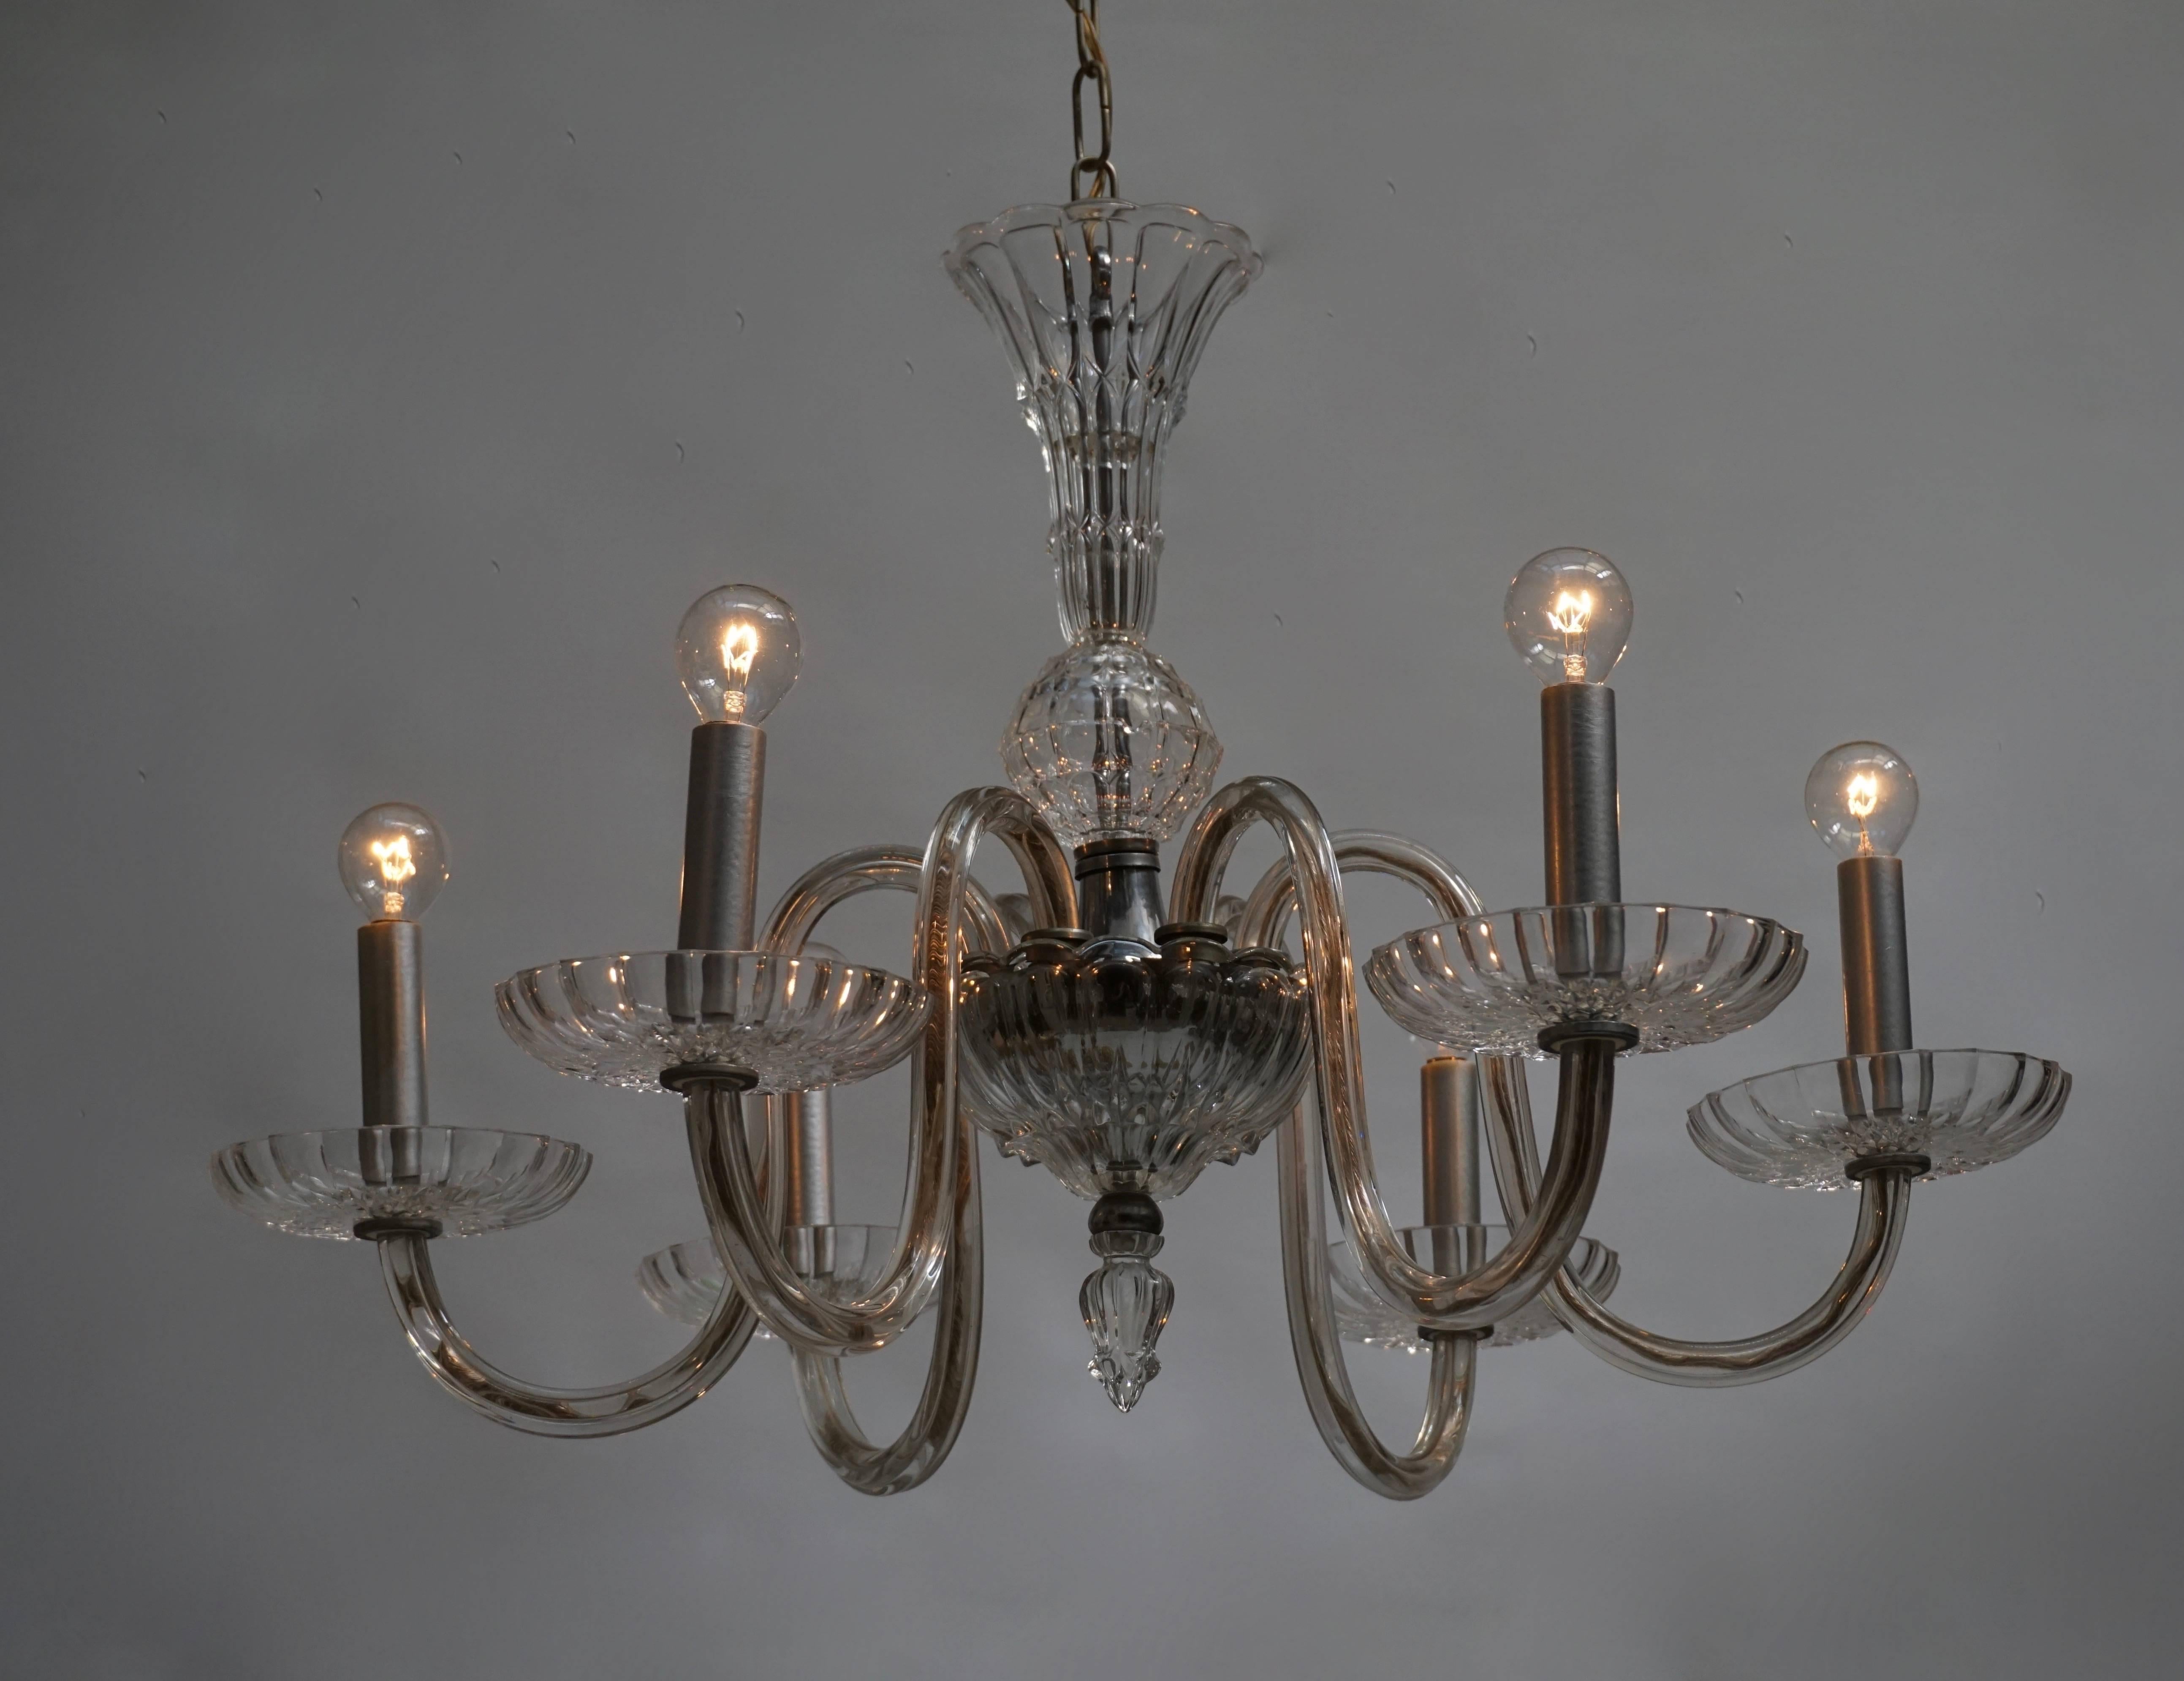 Venetian glass chandelier with six arms.
Measures: Diameter 73 cm.
Height fixture 50 cm.
Total height with the chain 85 cm.